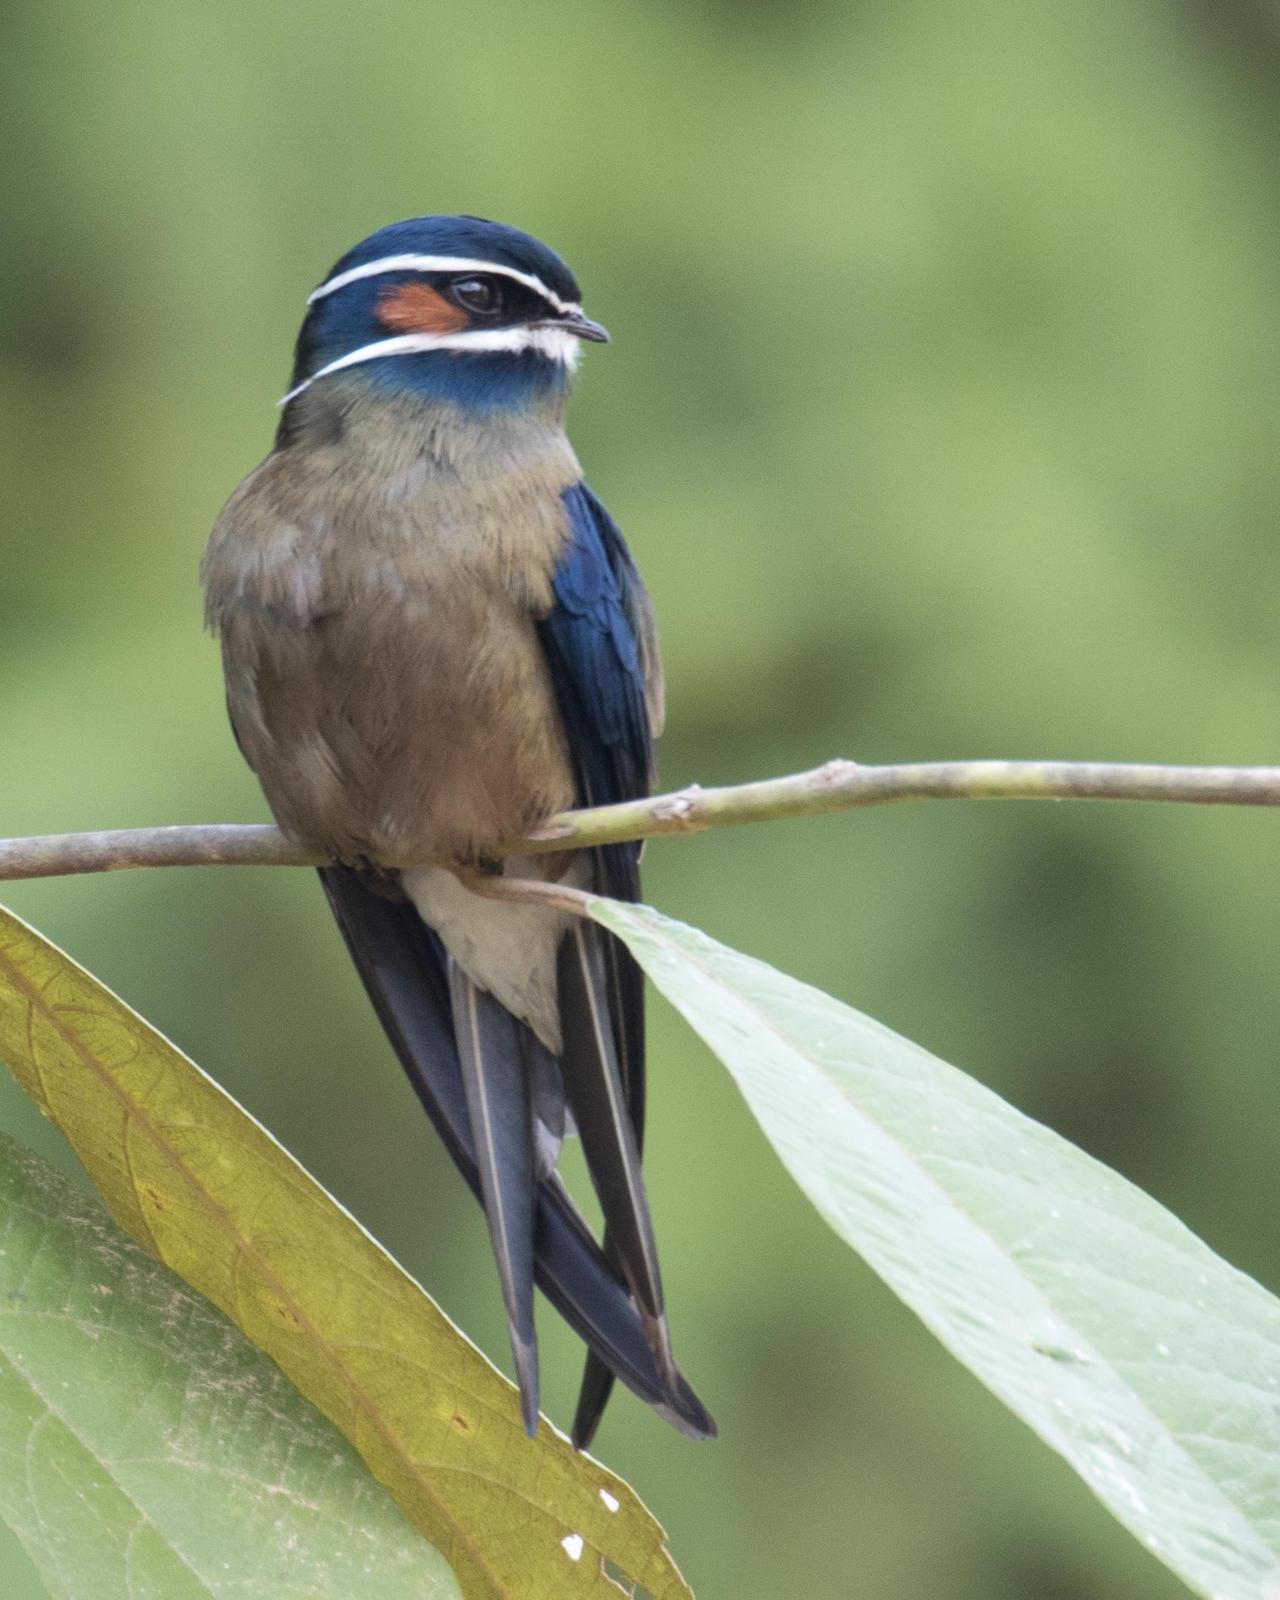 Whiskered Treeswift Photo by Robert Lewis